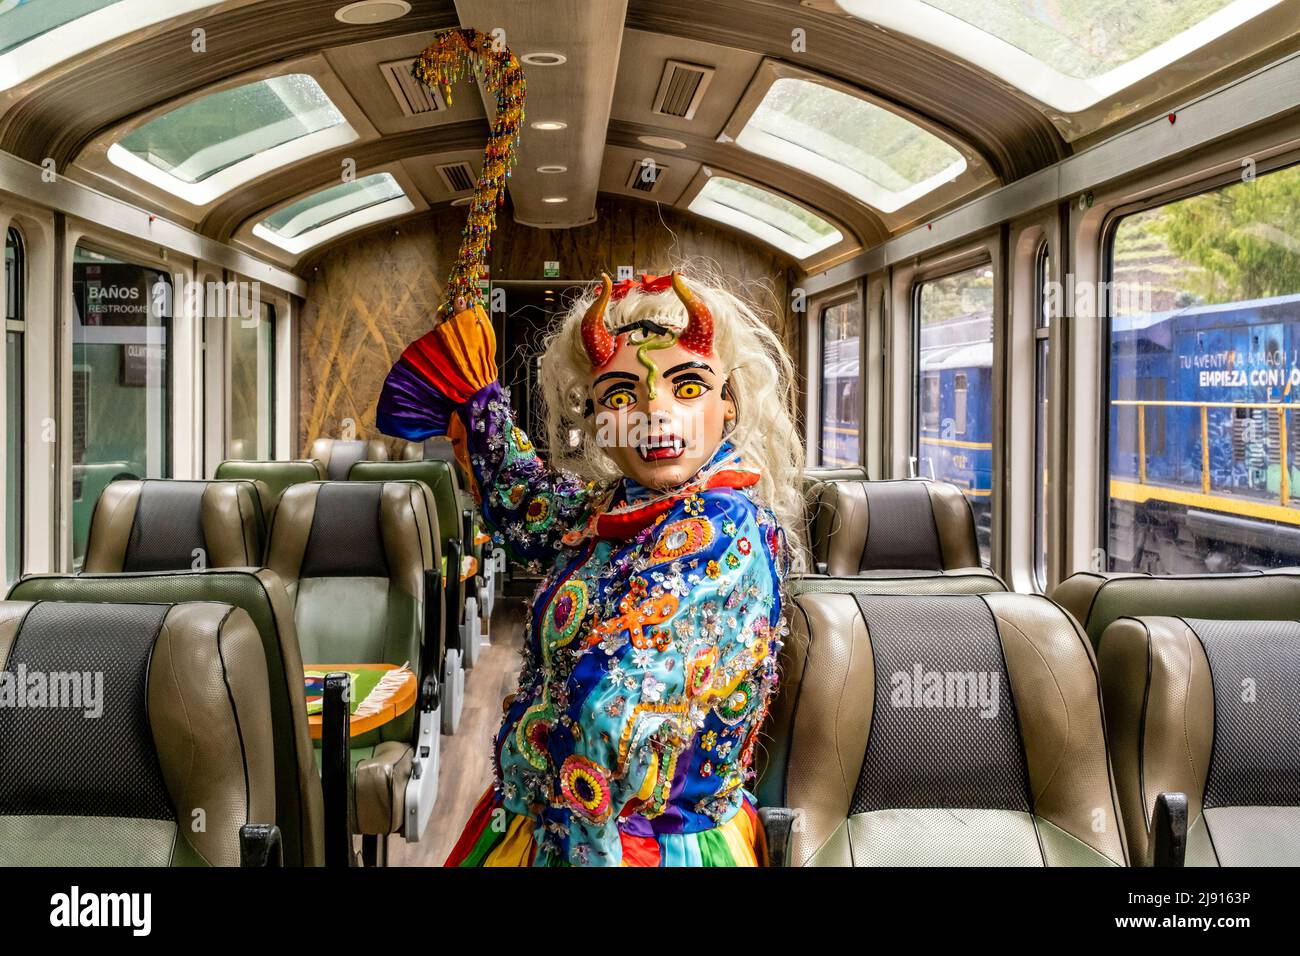 A Peruvian Cultural Show Entertainer Performing Onboard A Train Travelling Between Ollantaytambo and Aguas Calientes Stations, Cusco Region, Peru. Stock Photo